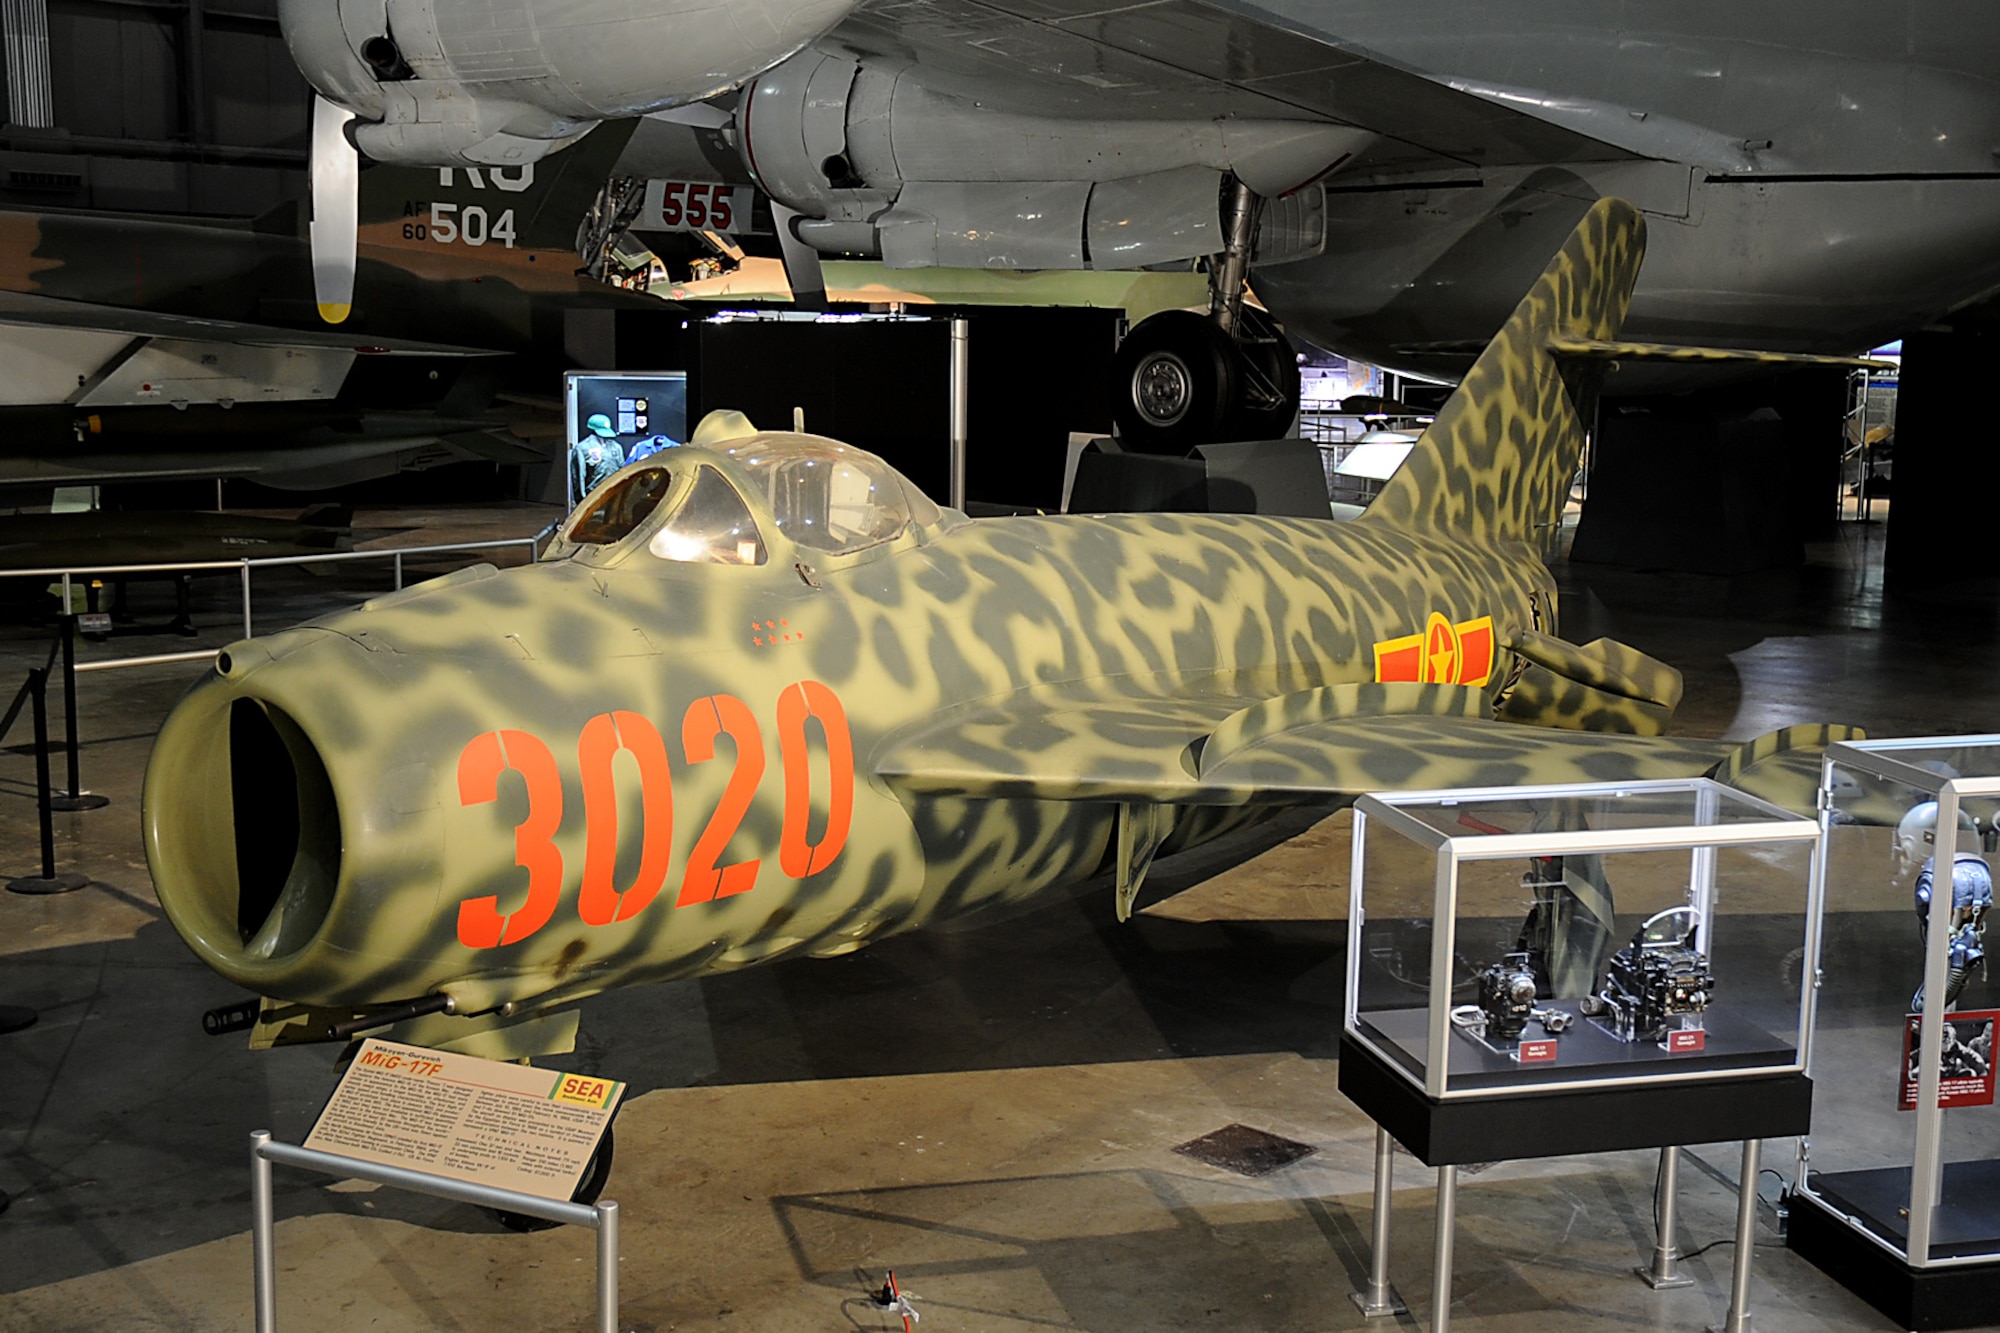 DAYTON, Ohio - Mikoyan-Gurevich MiG-17F in the Southeast Asia War Gallery at the National Museum of the United States Air Force. (U.S. Air Force photo)